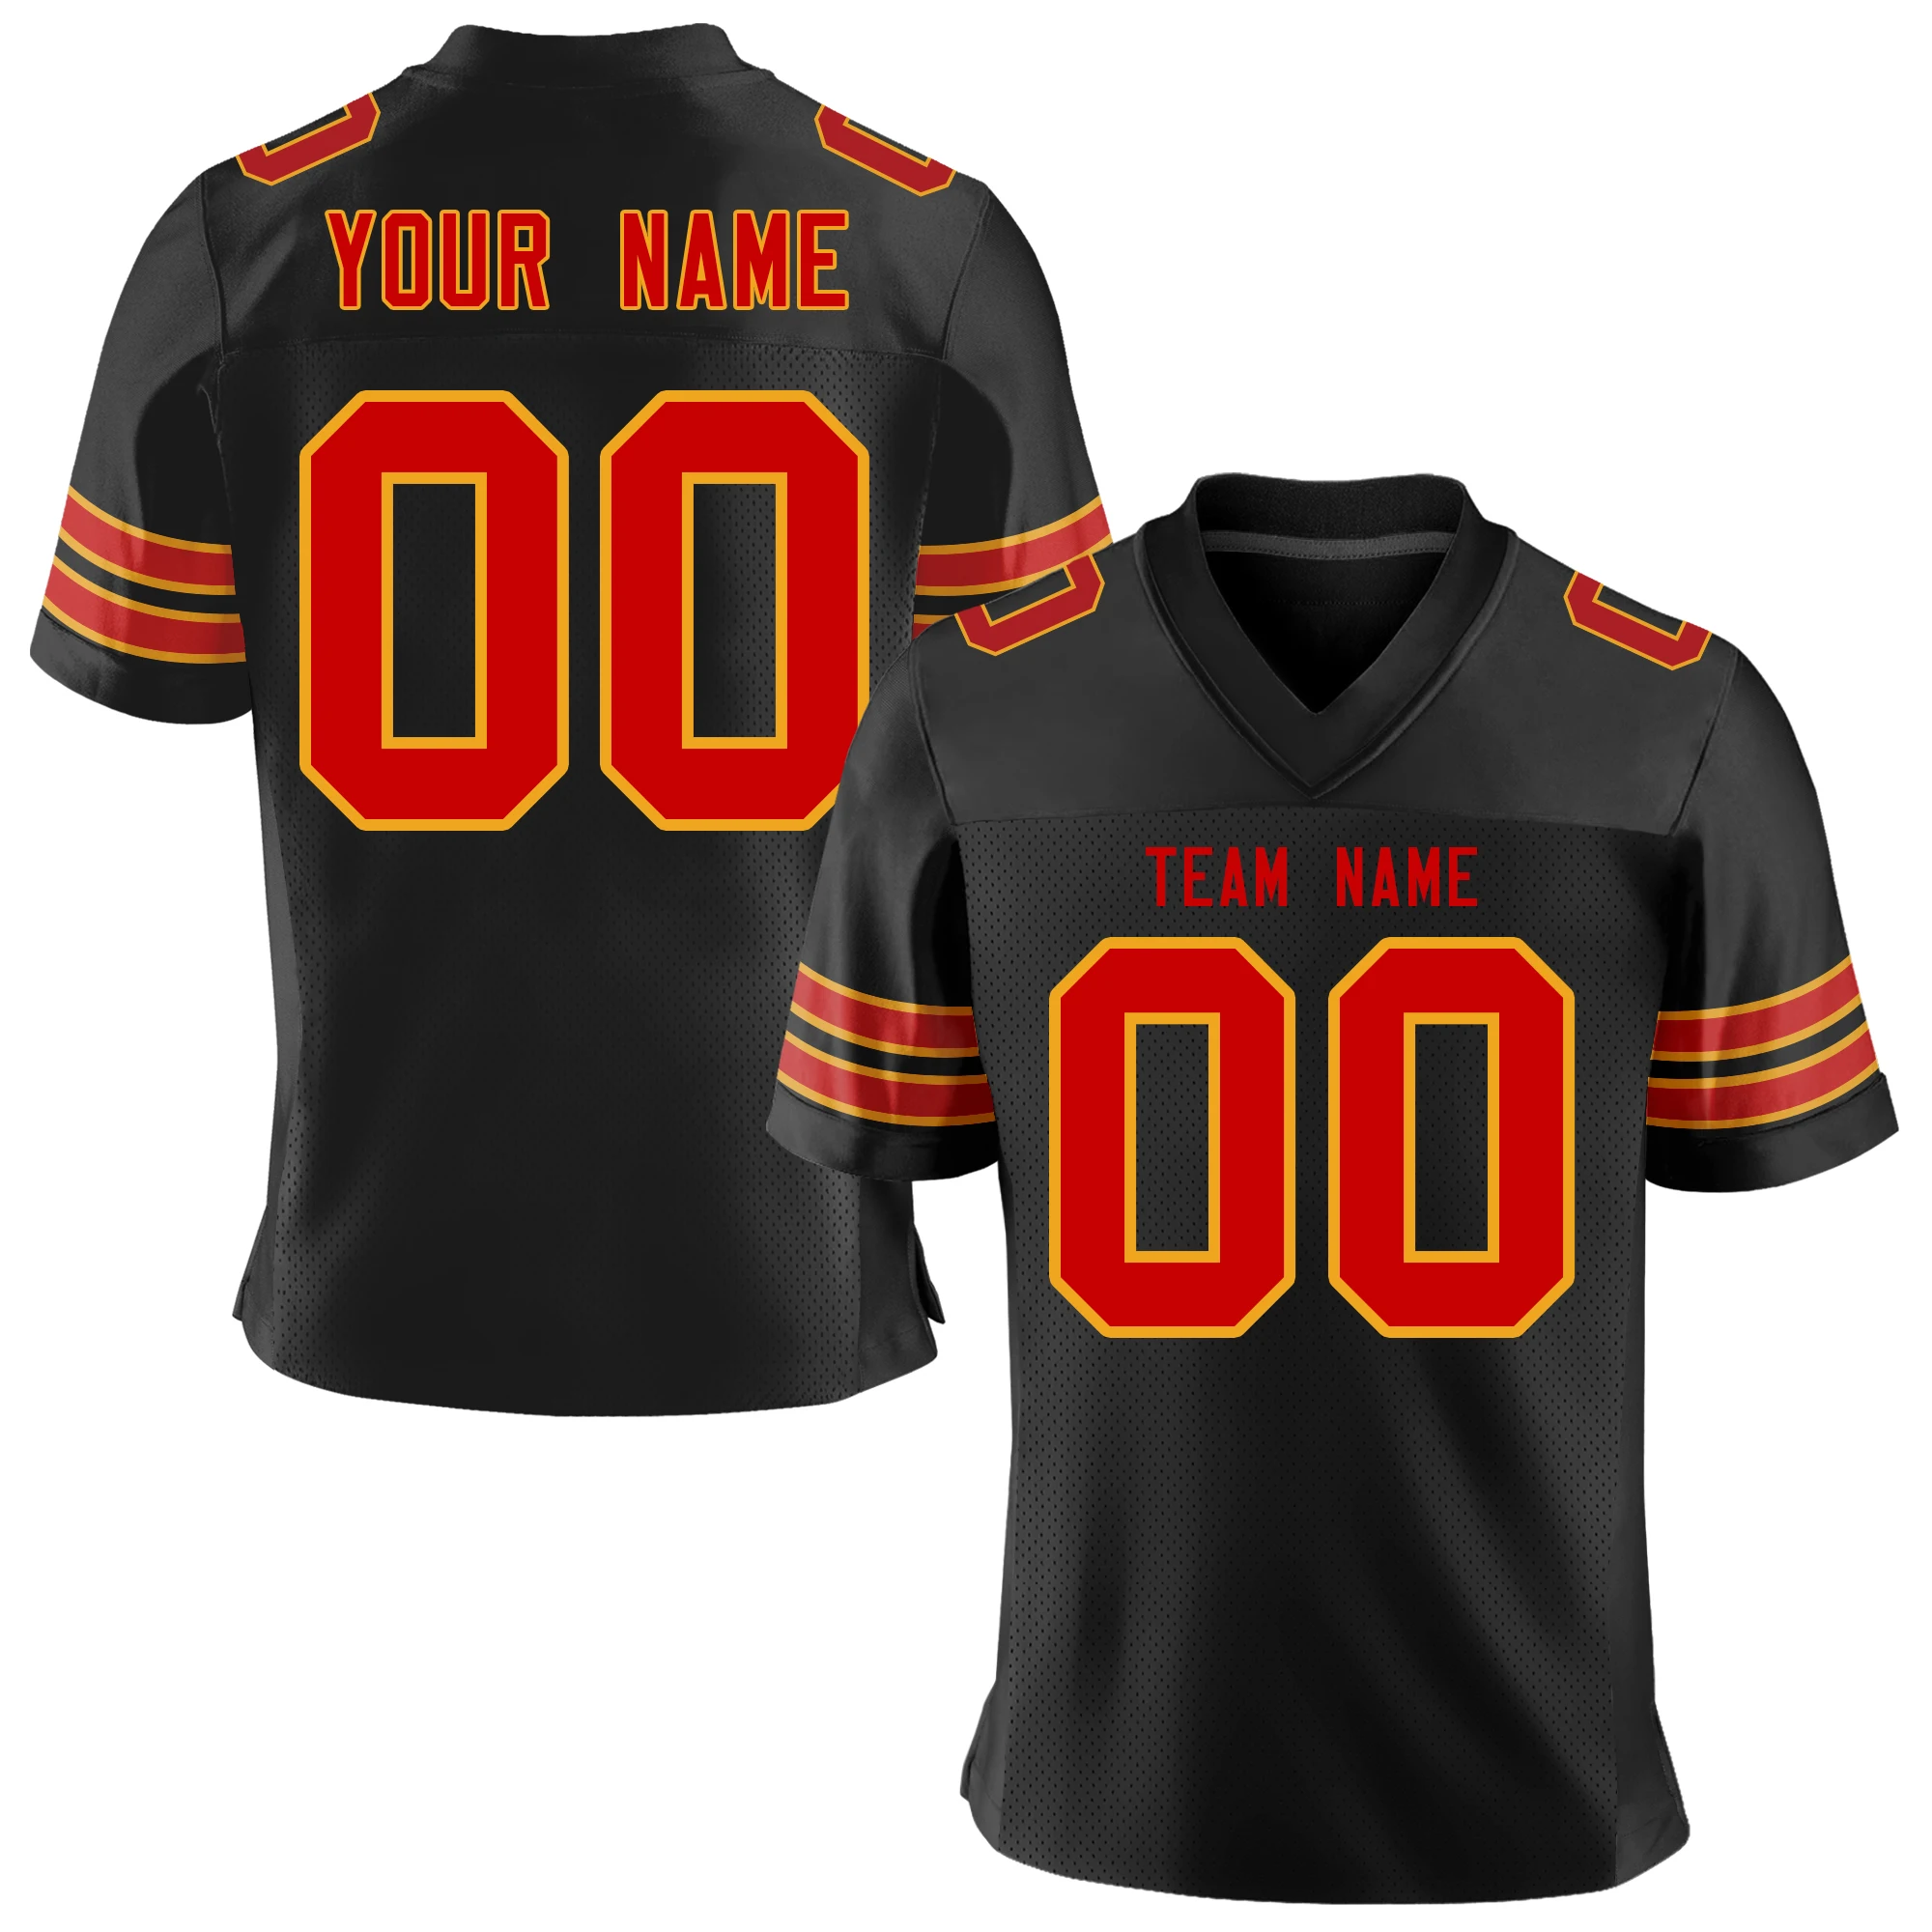 Fashion Customized Football Jersey Printing Team Name/Number Tra